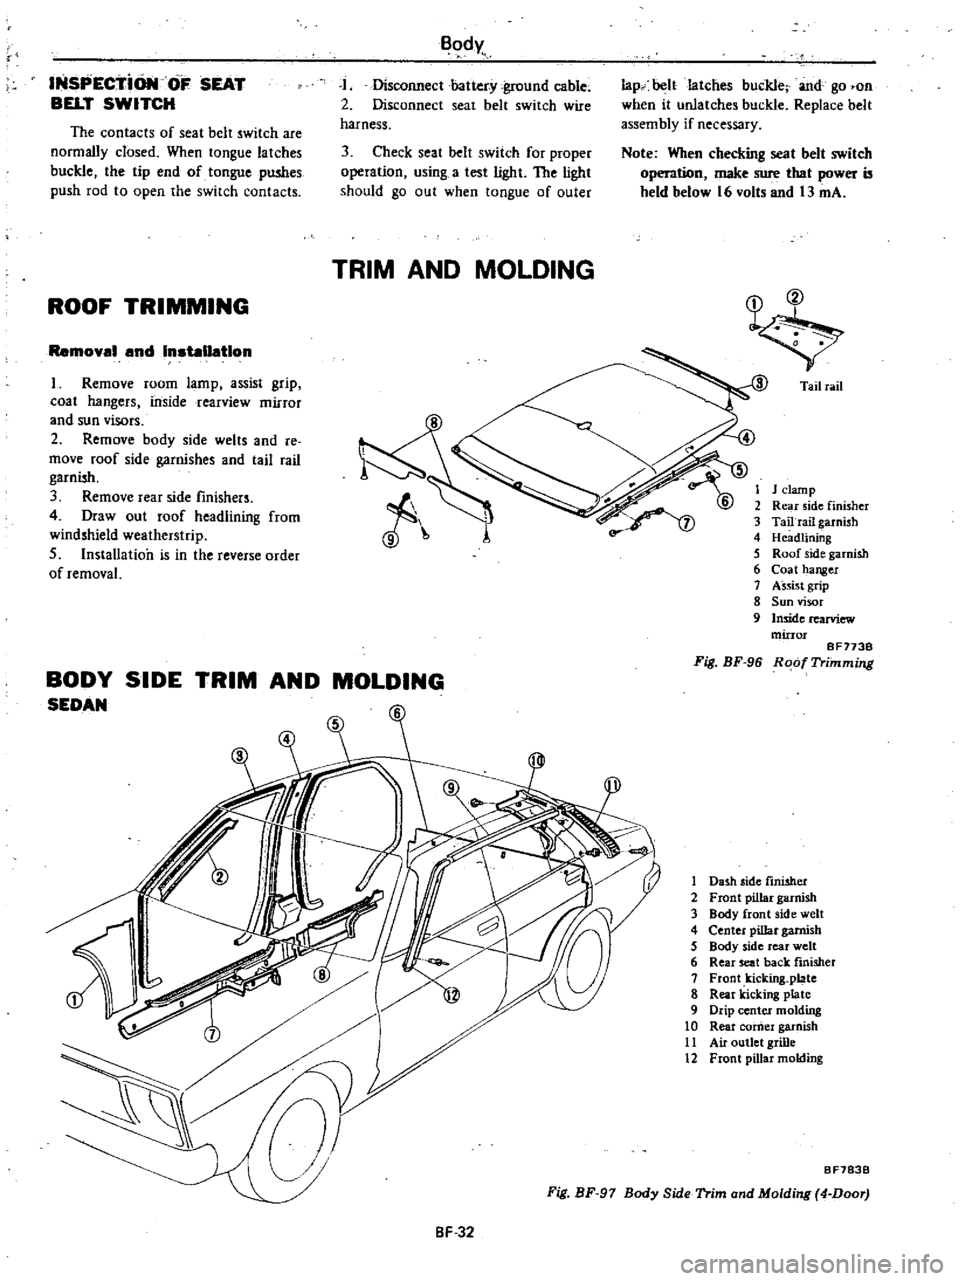 DATSUN 210 1979  Service Manual 
INSPECTiON 
OF 
SEAT

BELT 
SWITCH

The

contacts 
of 
seat

belt 
switch 
are

normally 
closed 
When

tongue 
latches

buckle 
the

tip 
end 
of

tongue 
pushes

push 
rod 
to

open 
the

switch 
c